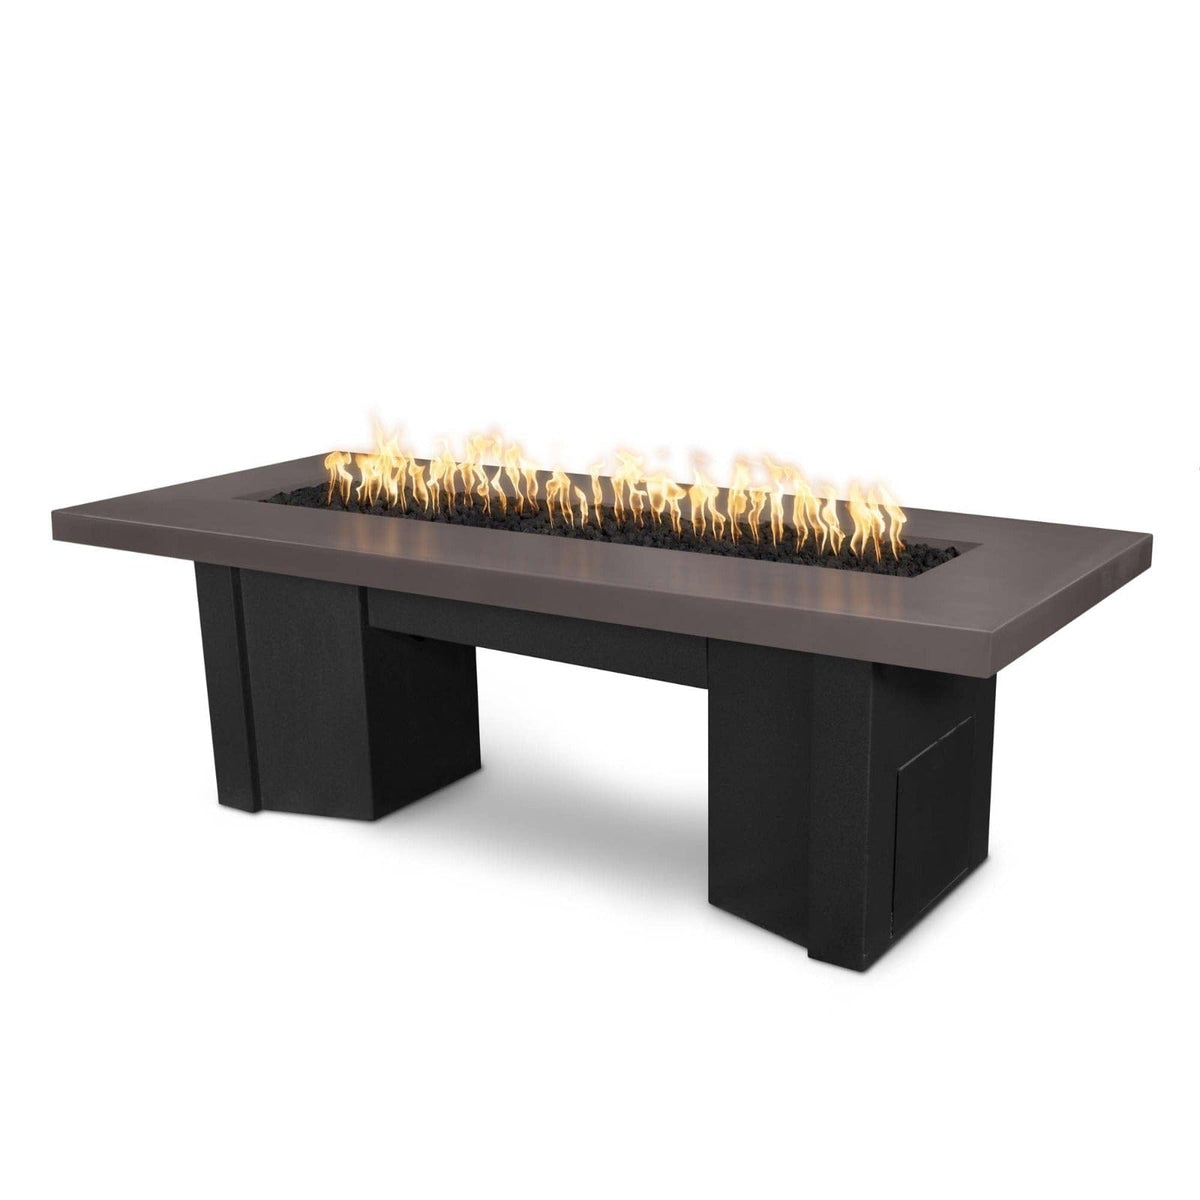 The Outdoor Plus Fire Features Chestnut (-CST) / Black Powder Coated Steel (-BLK) The Outdoor Plus 60&quot; Alameda Fire Table Smooth Concrete in Liquid Propane - 110V Plug &amp; Play Electronic Ignition / OPT-ALMGFRC60EKIT-LP